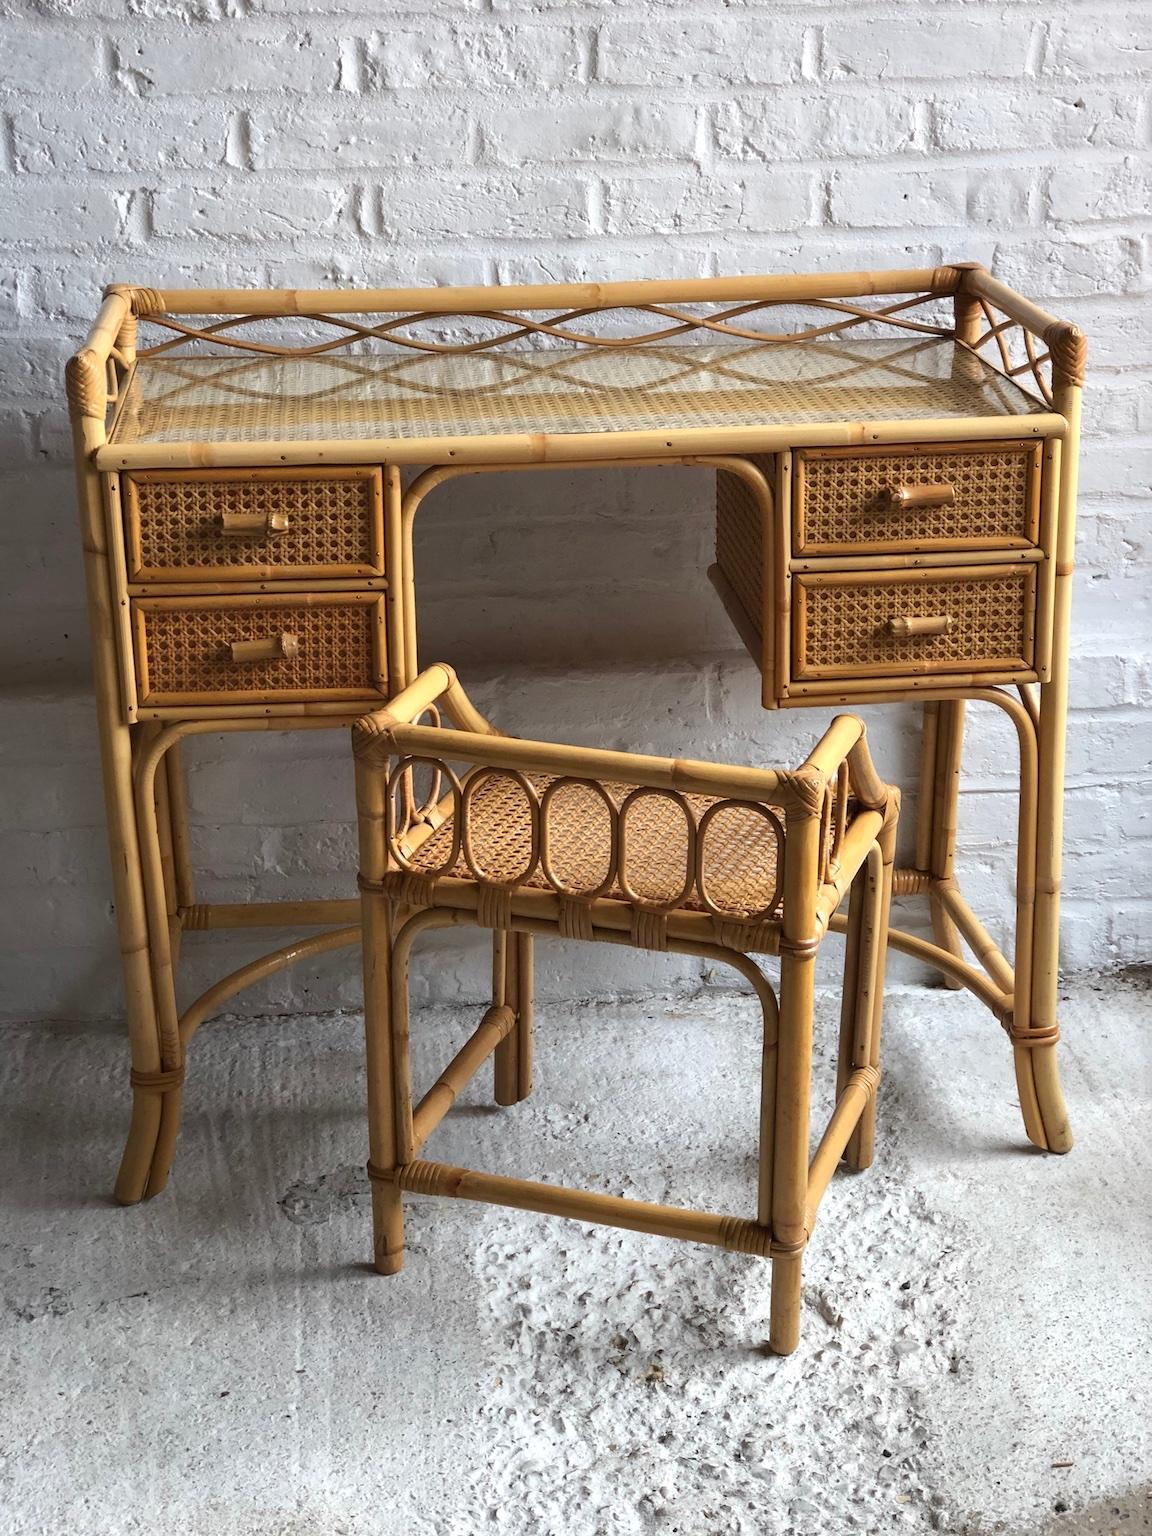 Midcentury rattan cane dressing table or small desk, stool and mirror set, England, 1970s

This is a beautiful set consisting of a dressing table or small desk, matching stool and vanity mirror. 
Made by English company ‘Angraves of Leicester’, who